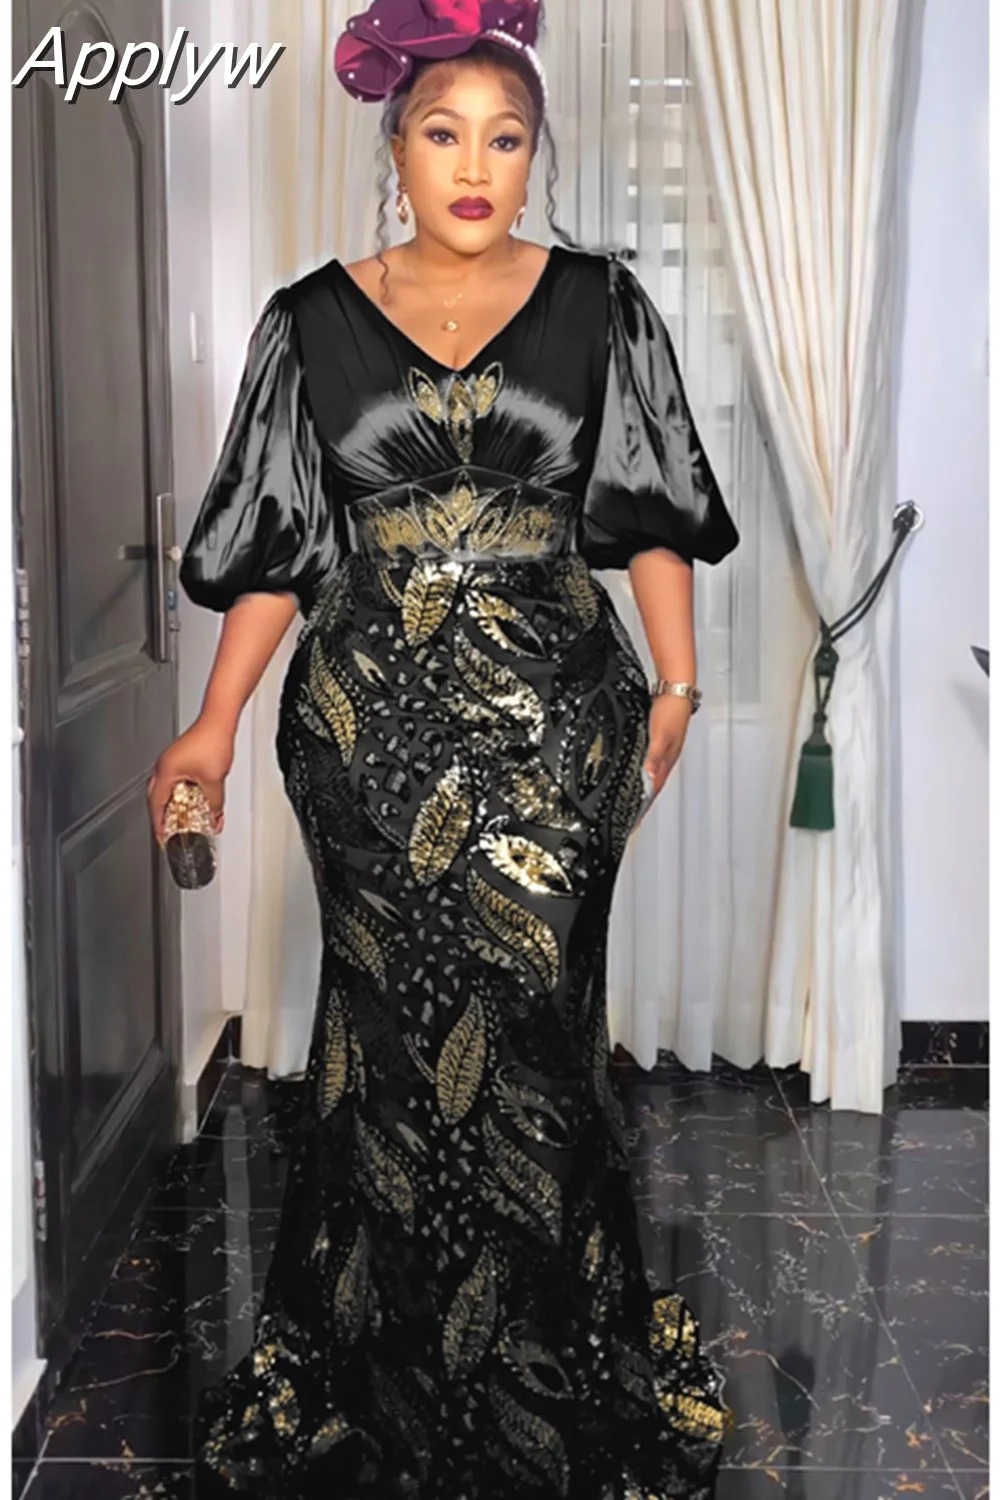 Applyw Summer African Women Plus Size Evening Dresses Wedding Party Long Luxury Sequin Gown Bodycon Mermaid Dress Ankara Clothing